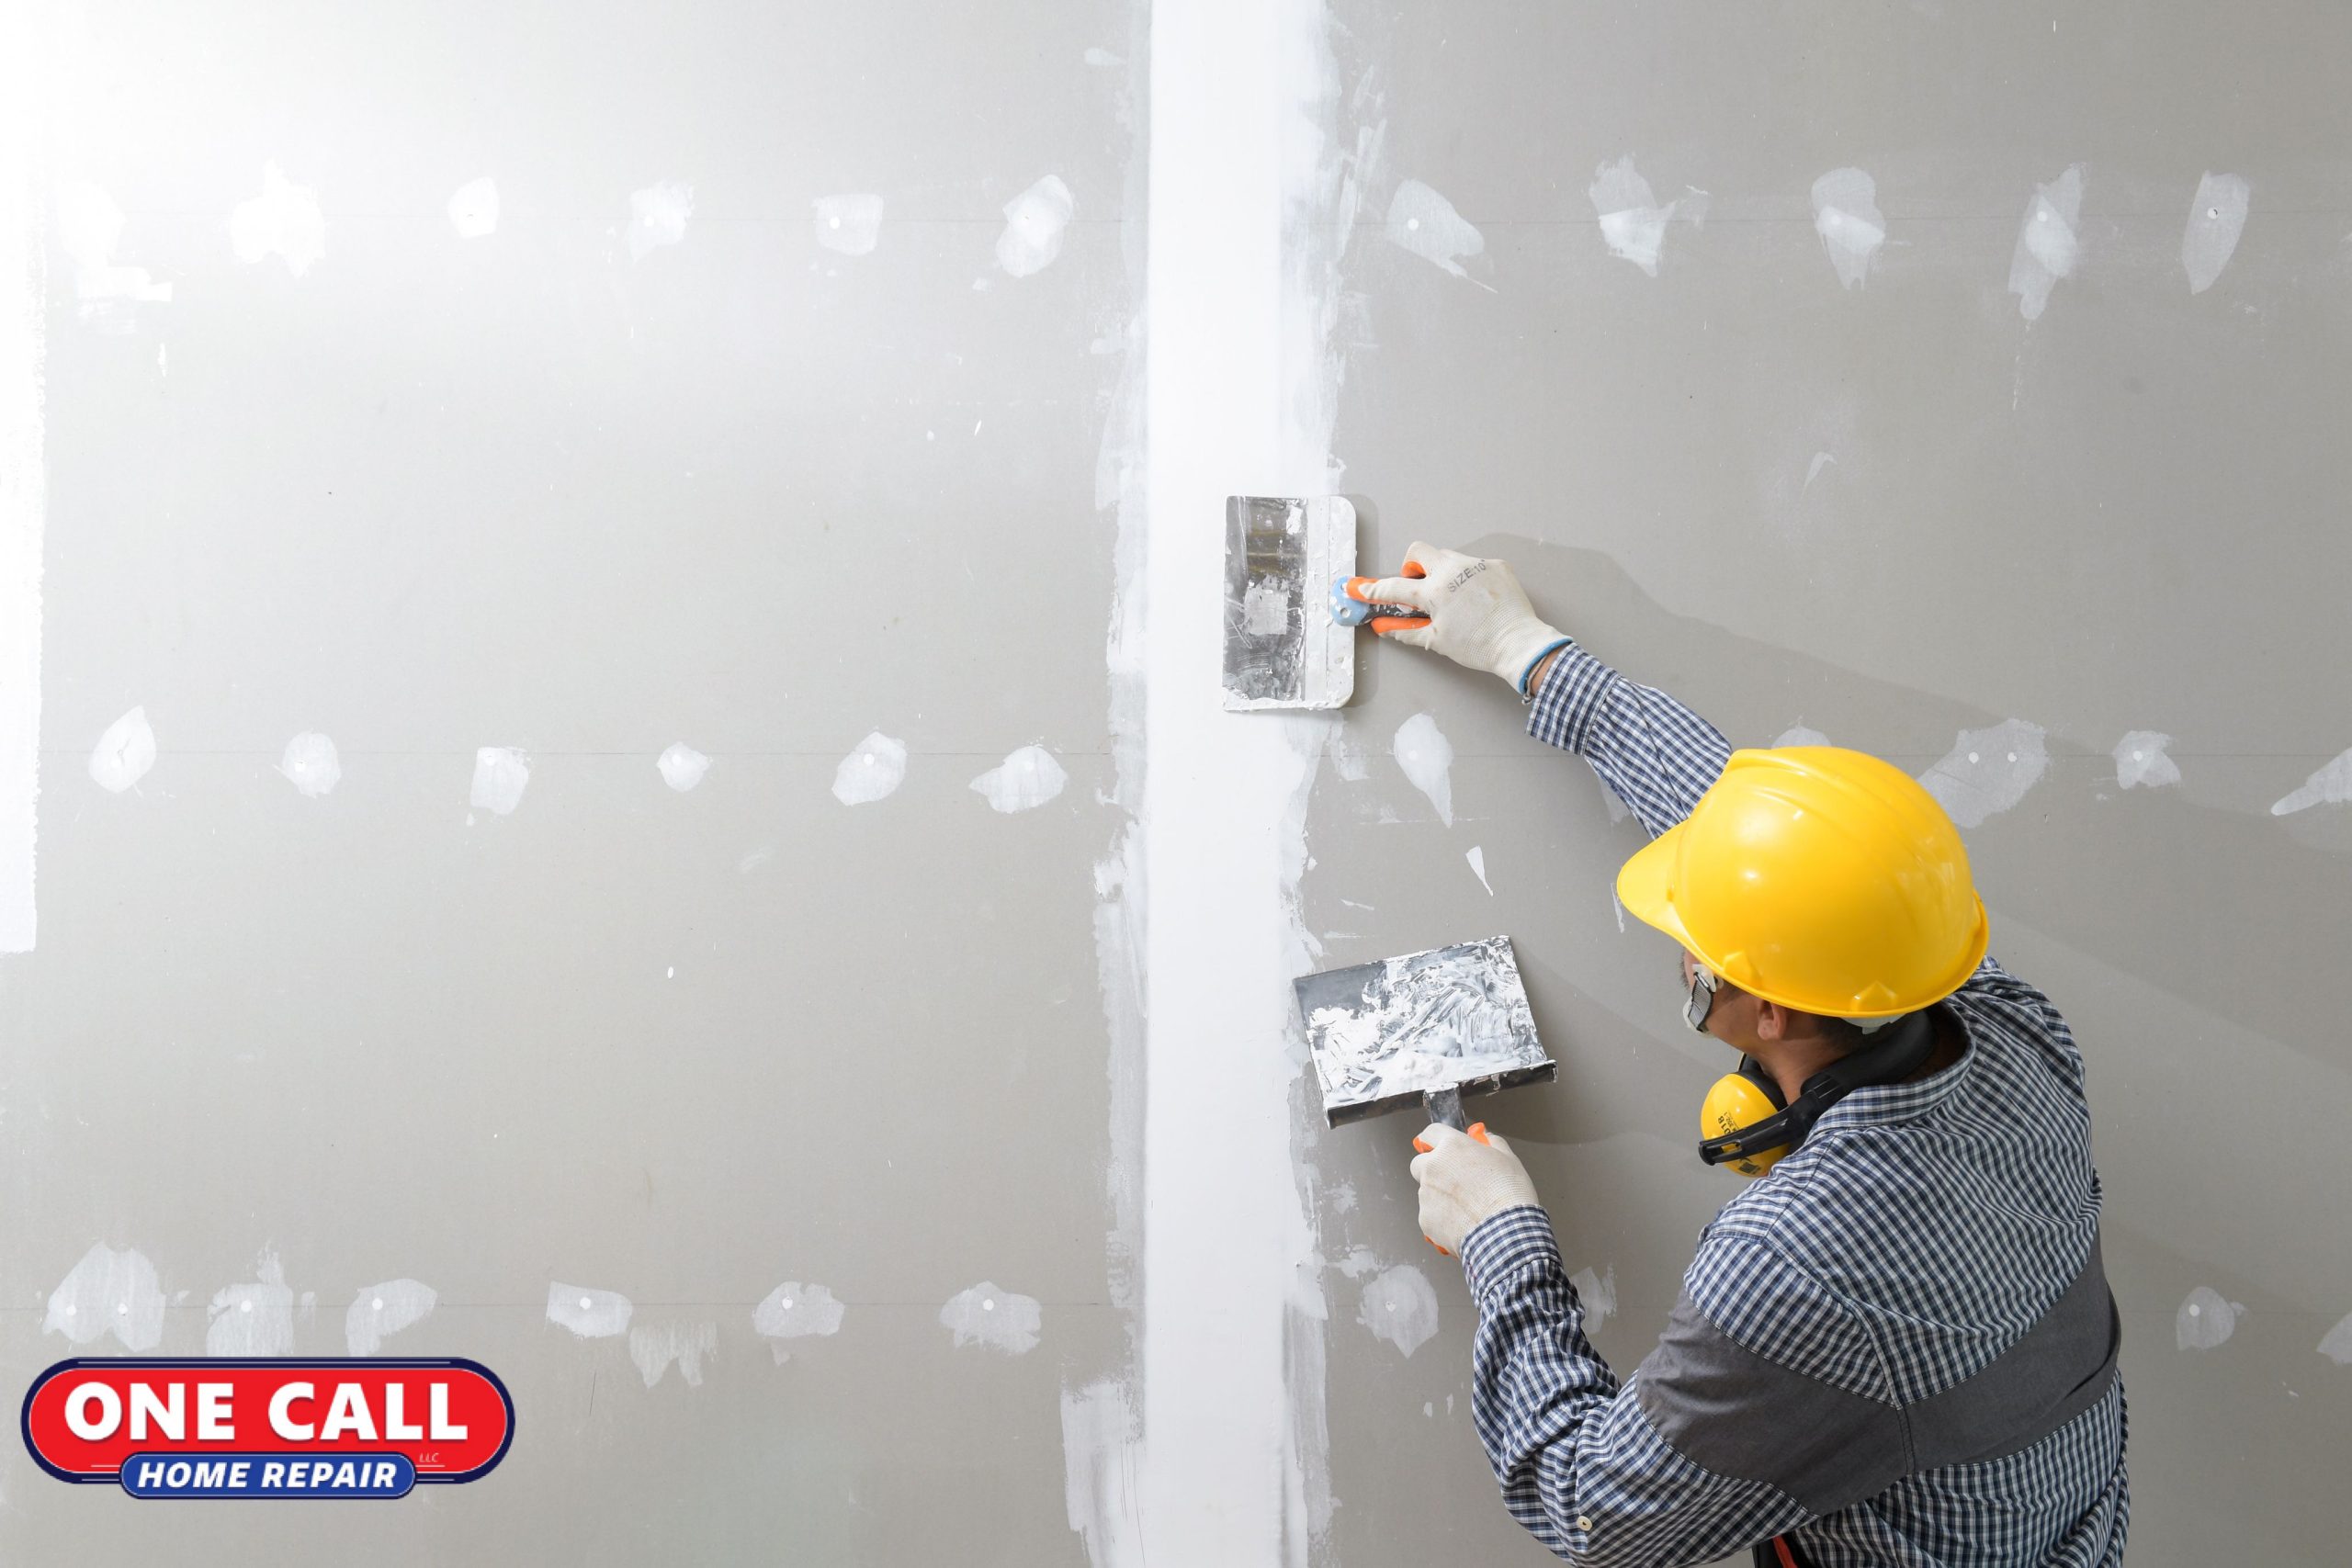 Where to Find Sheetrock Repair Services for Your Lynnwood Home’s Walls and Ceilings